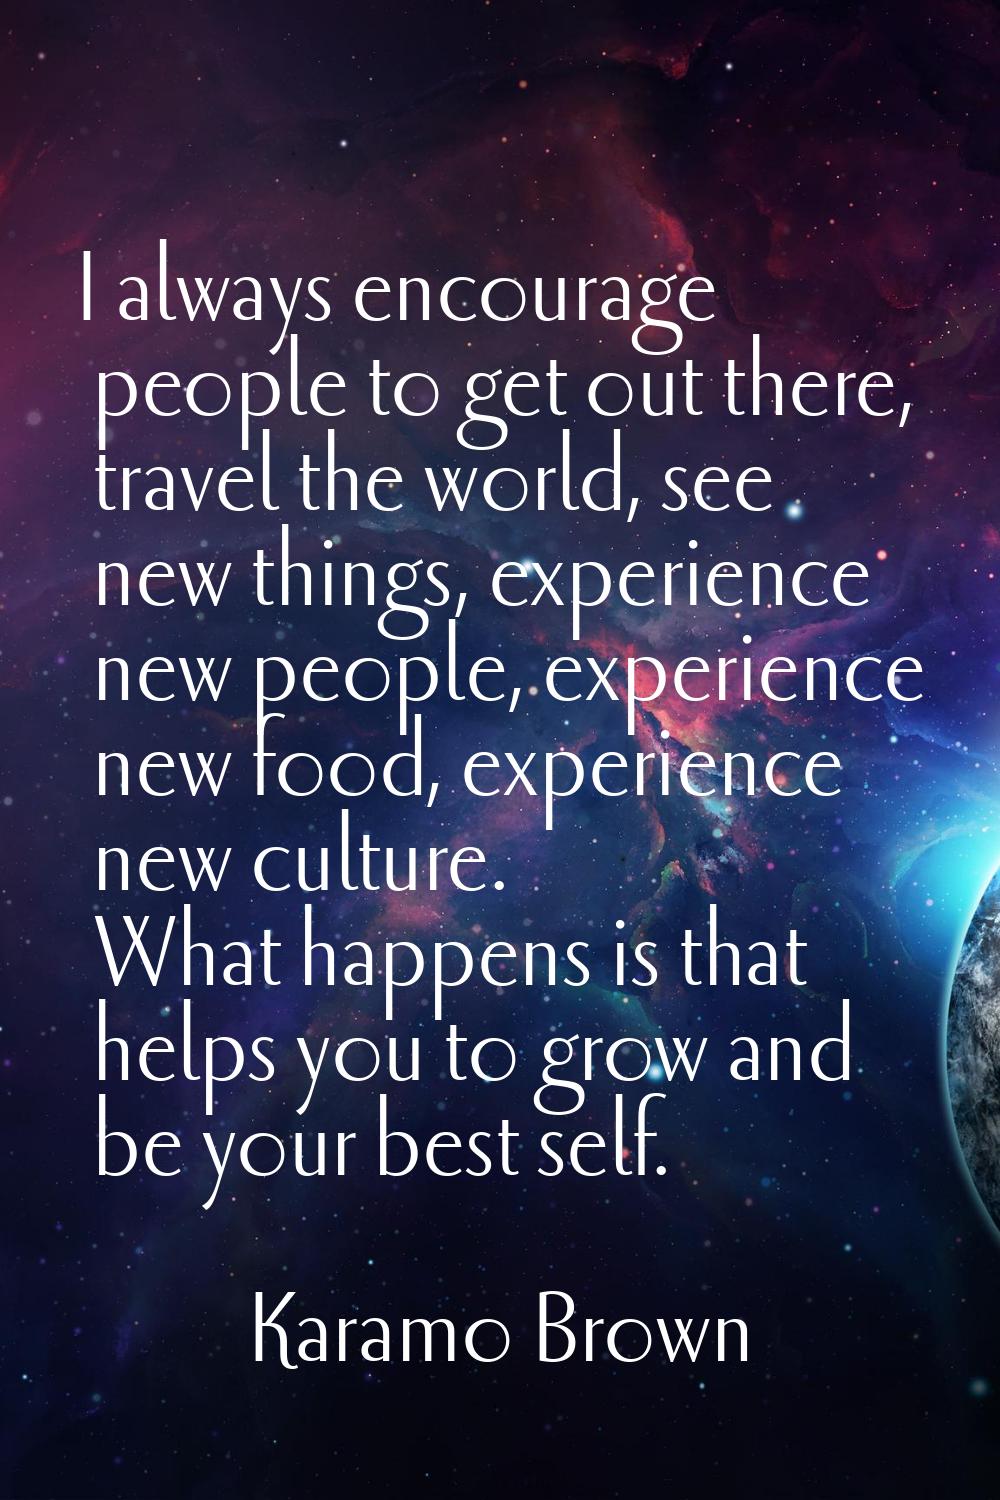 I always encourage people to get out there, travel the world, see new things, experience new people